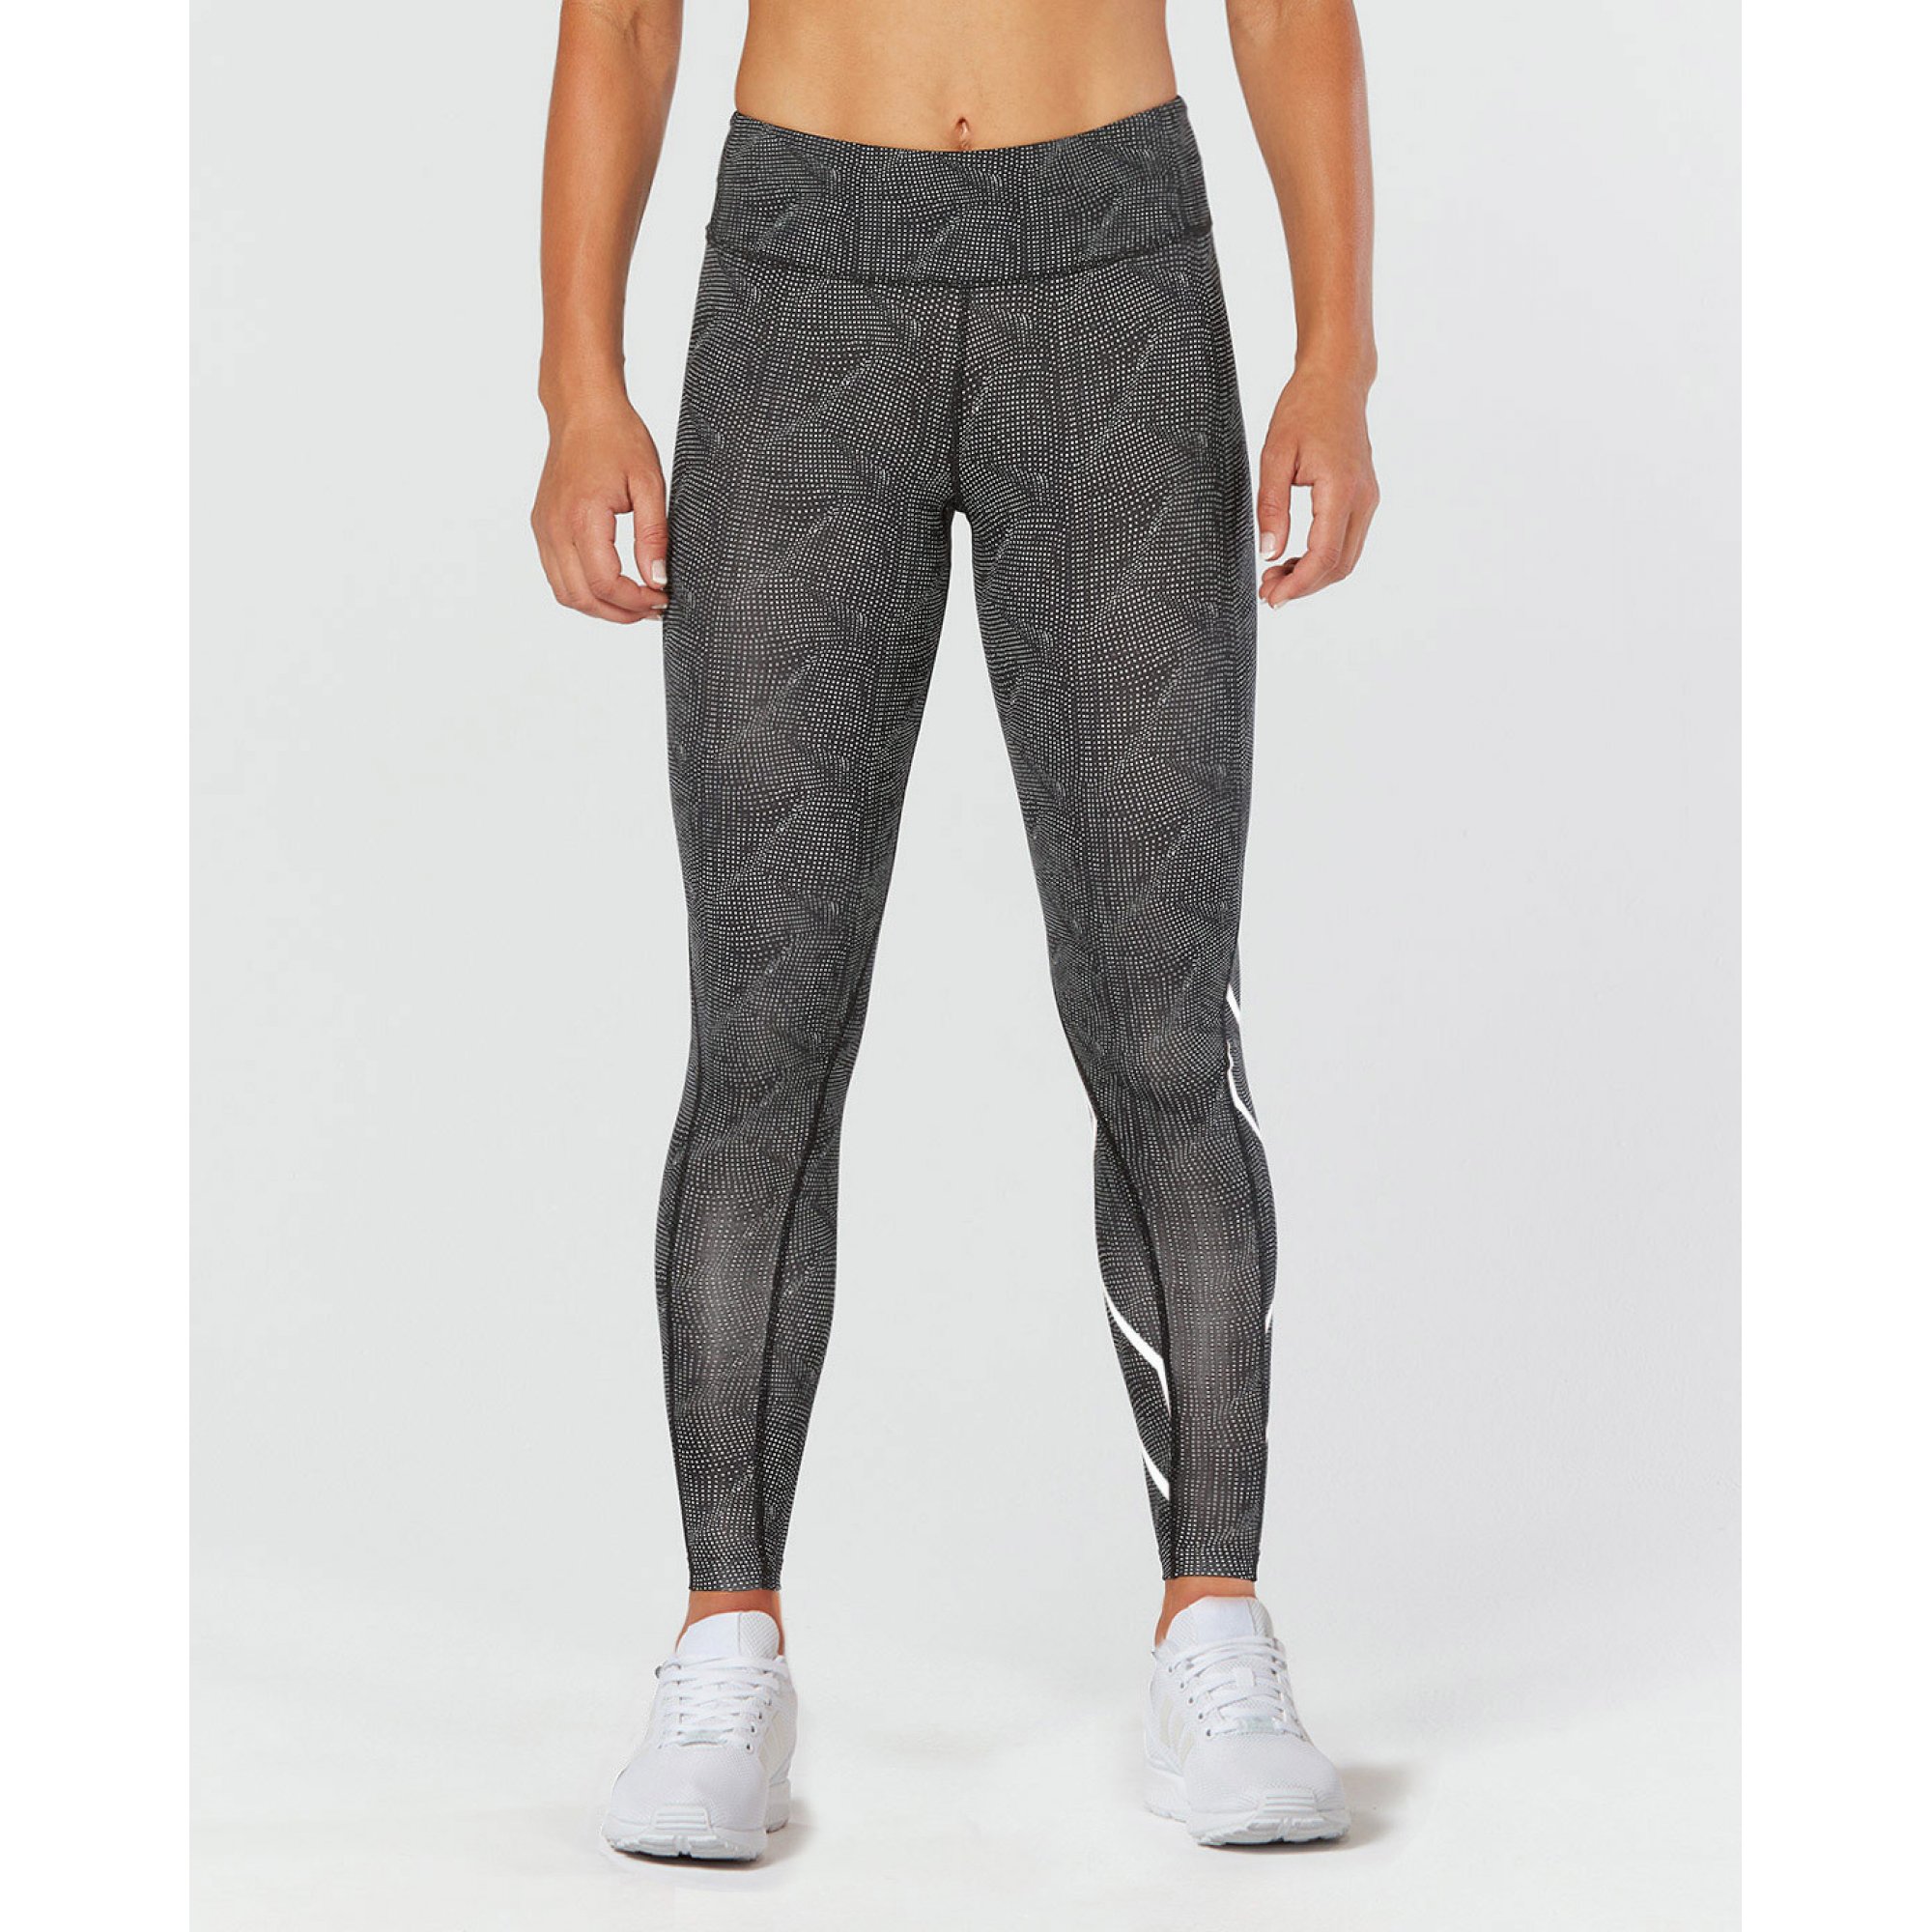 2XU - compression Tights for women Mid-Rise Tight - ...